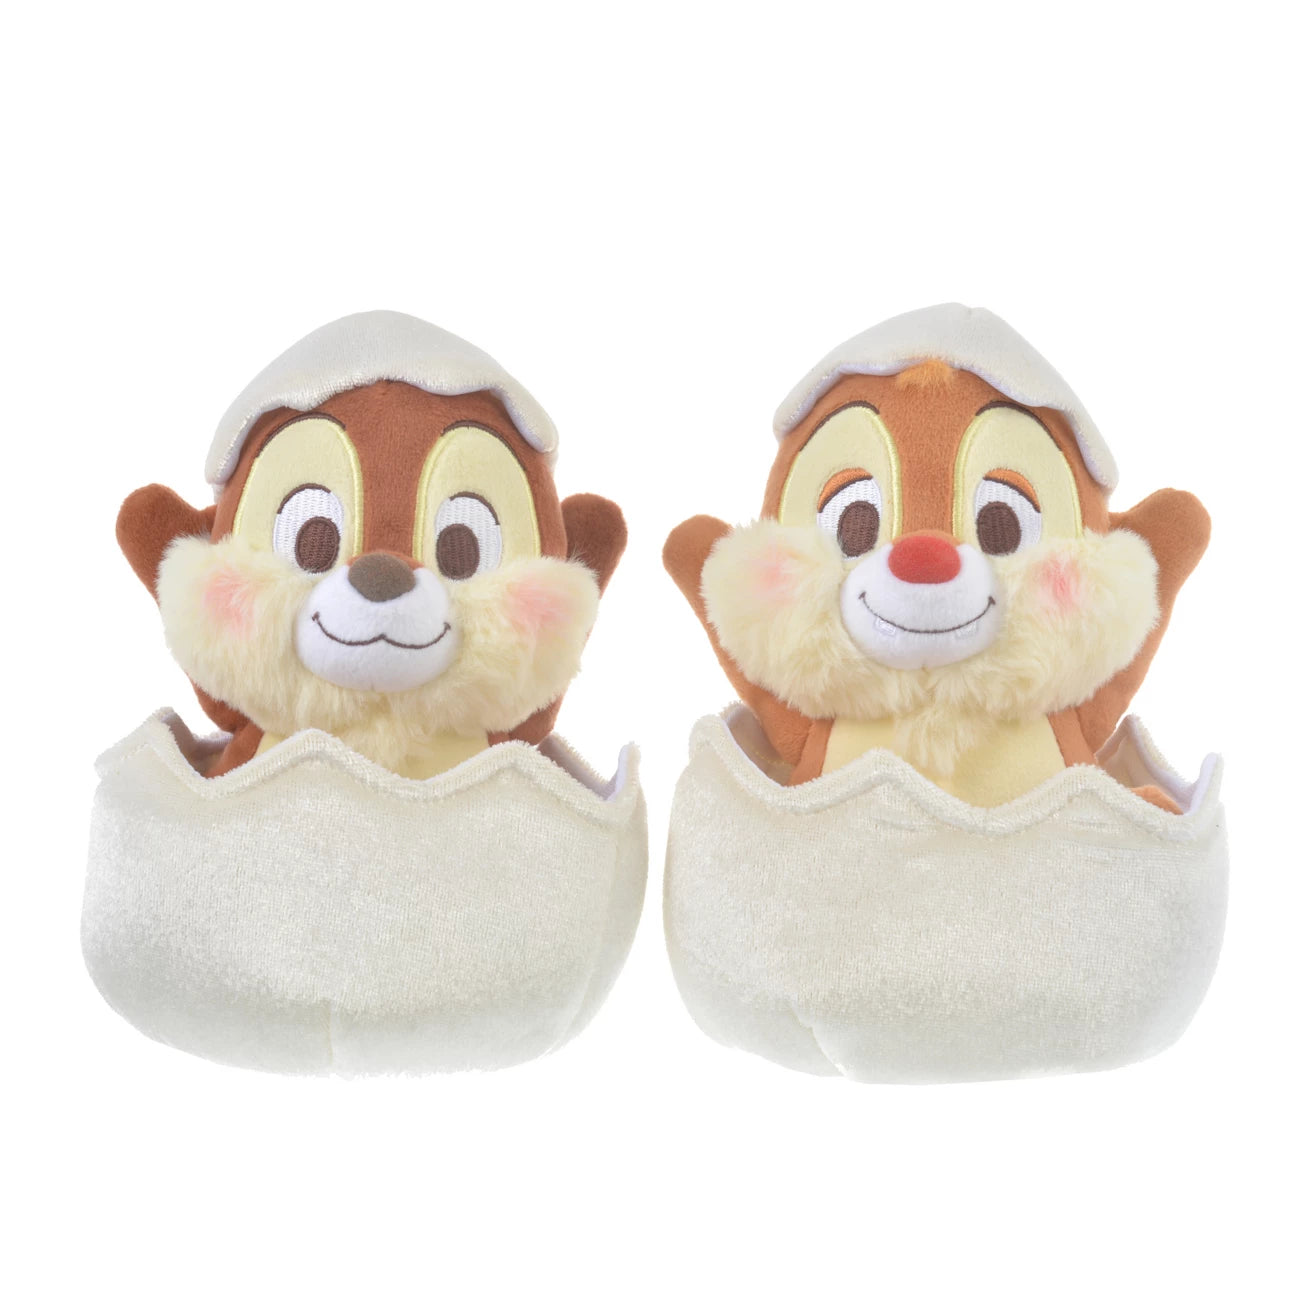 SDJ - CHIP AND DALE 2022 Collection